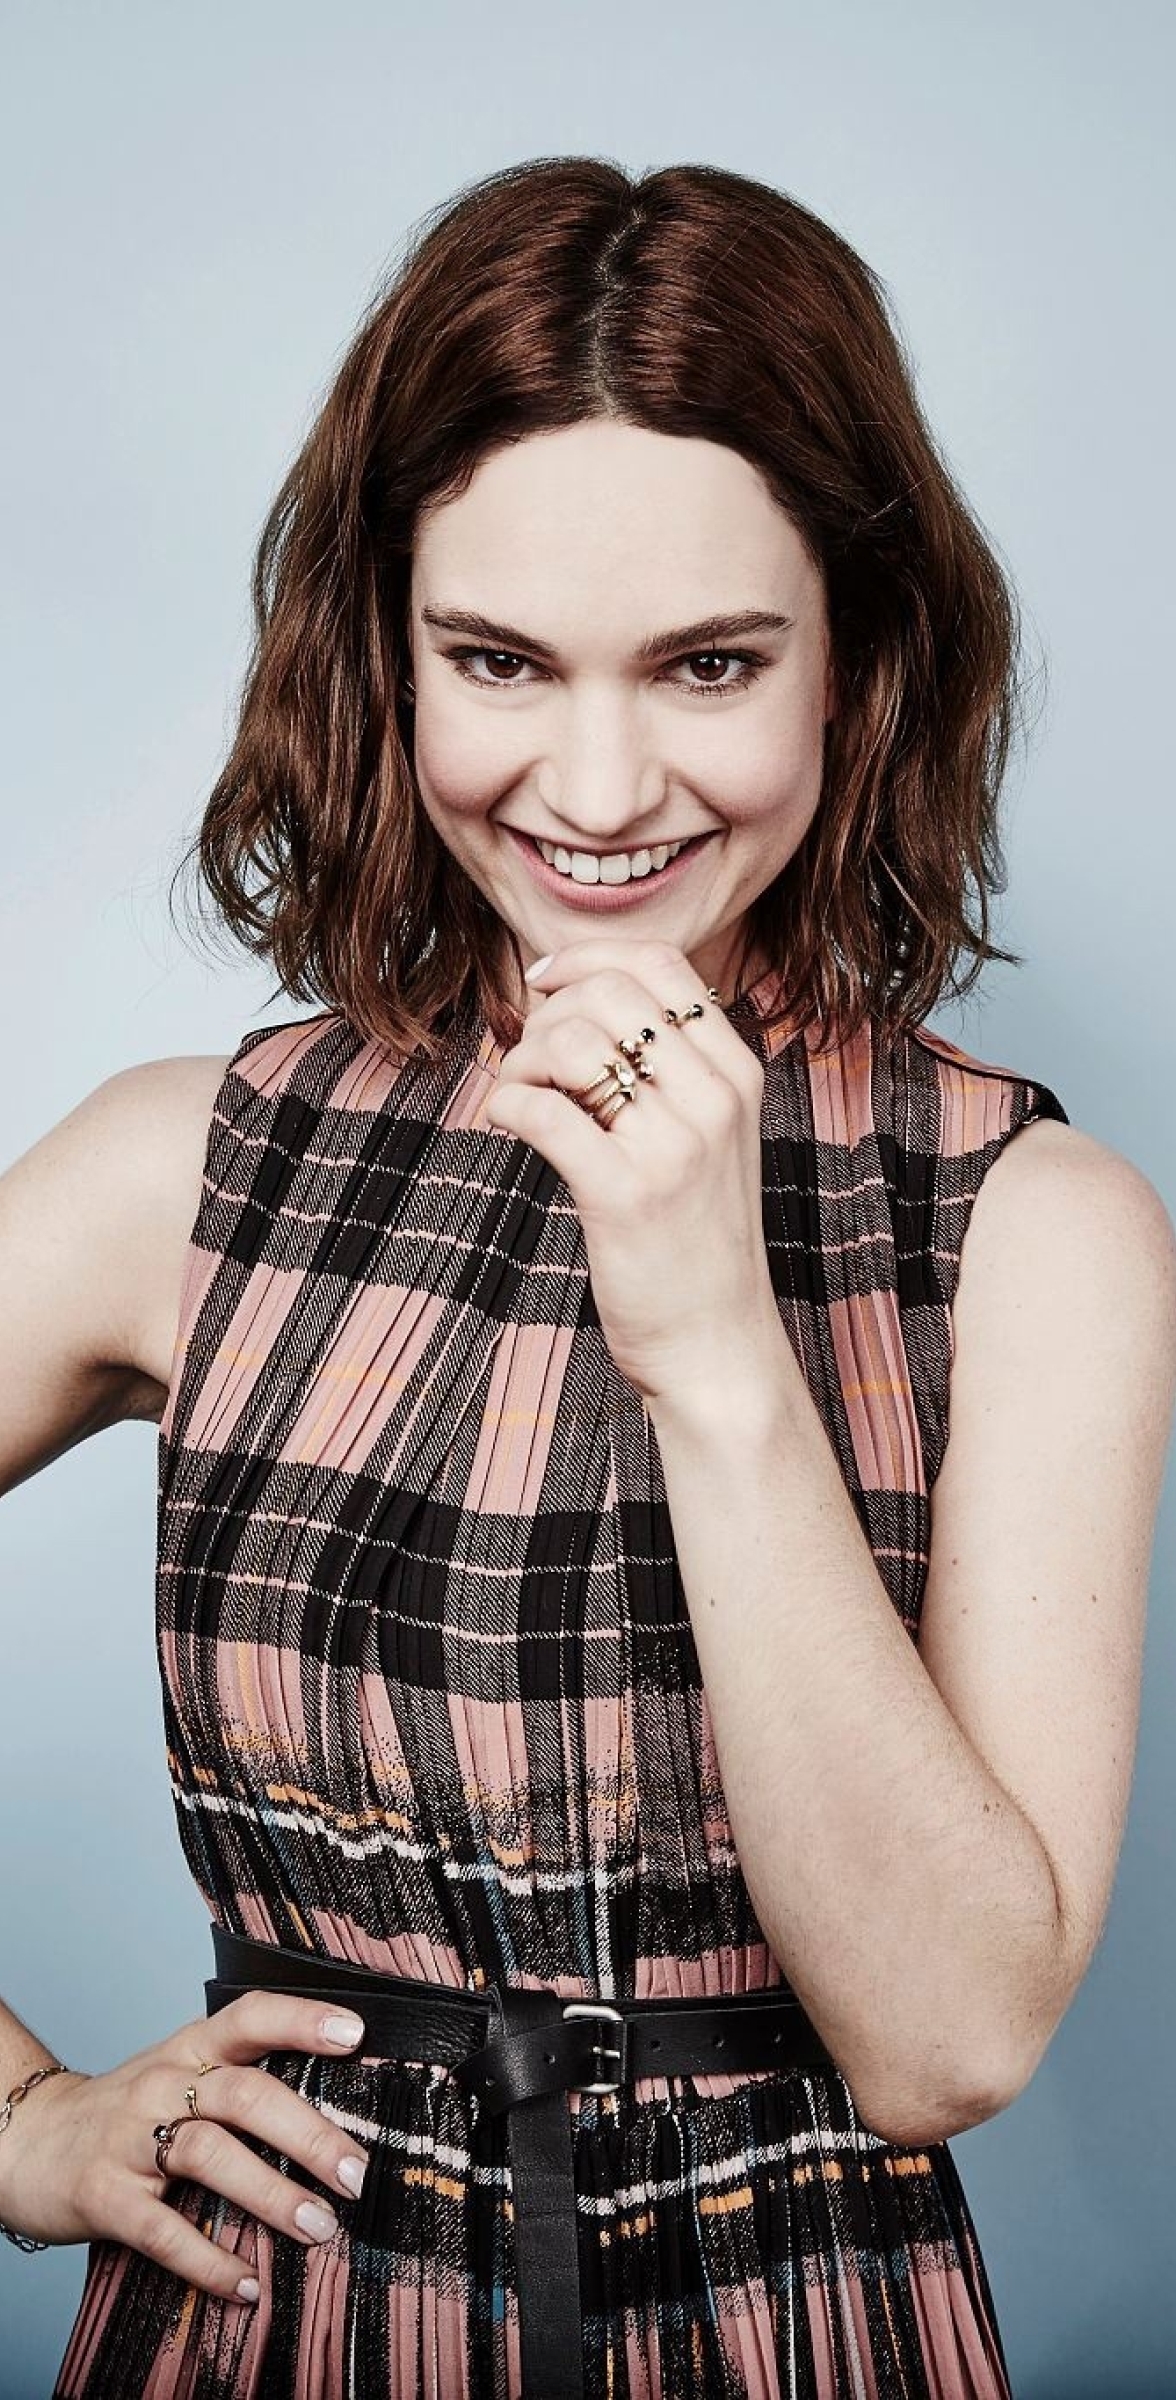 1176x2400 Lily James Smiling 1176x2400 Resolution Wallpaper Hd